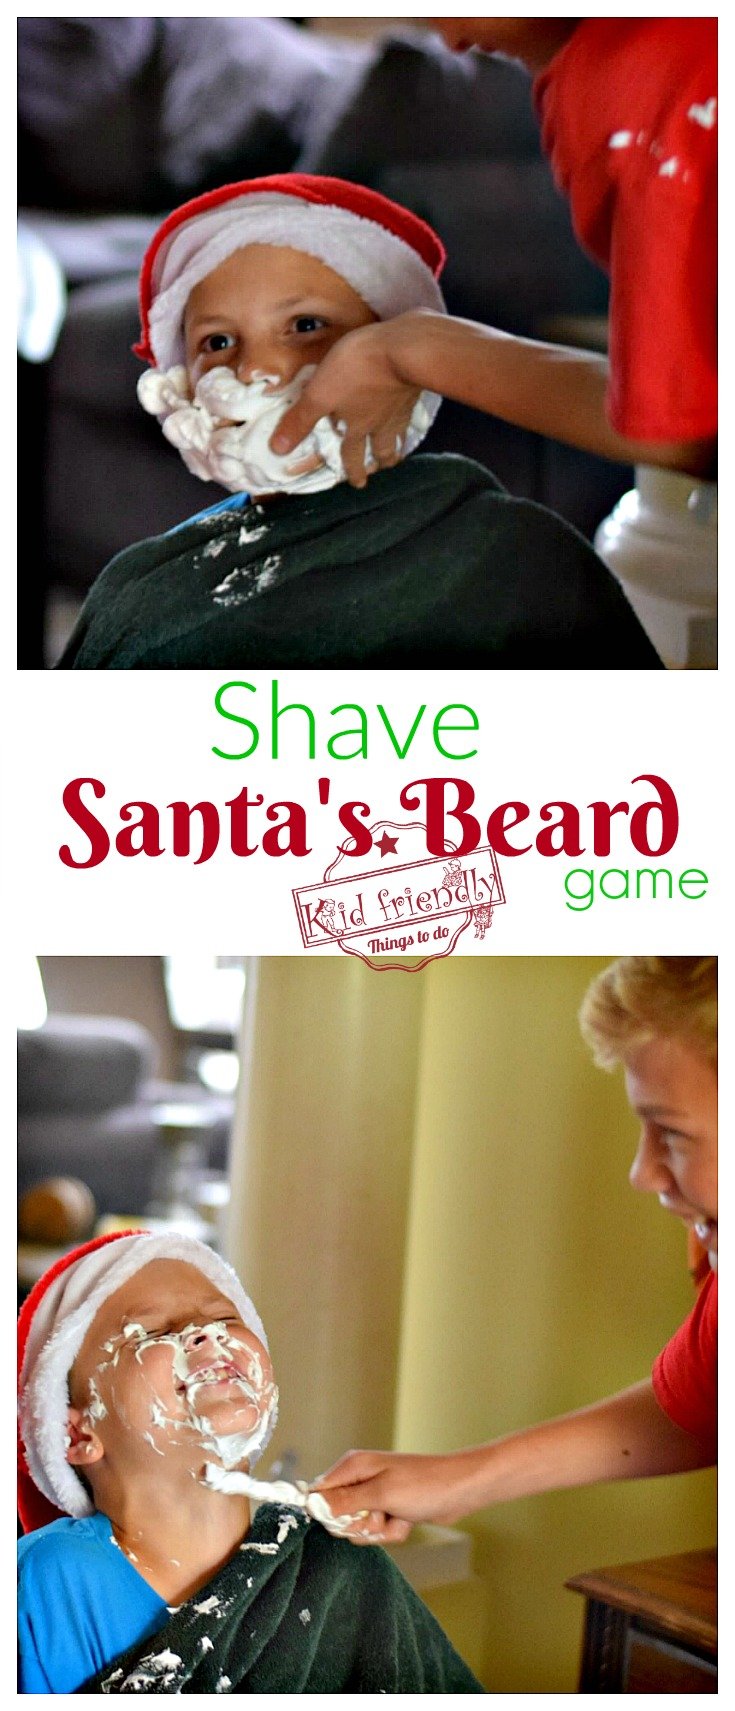 Shave Santa's Beard Christmas Game for Kids, Teens, and Family to play - Great Minute to Win It Game - Funny game for parties. www.kidfriendlythingstodo.com